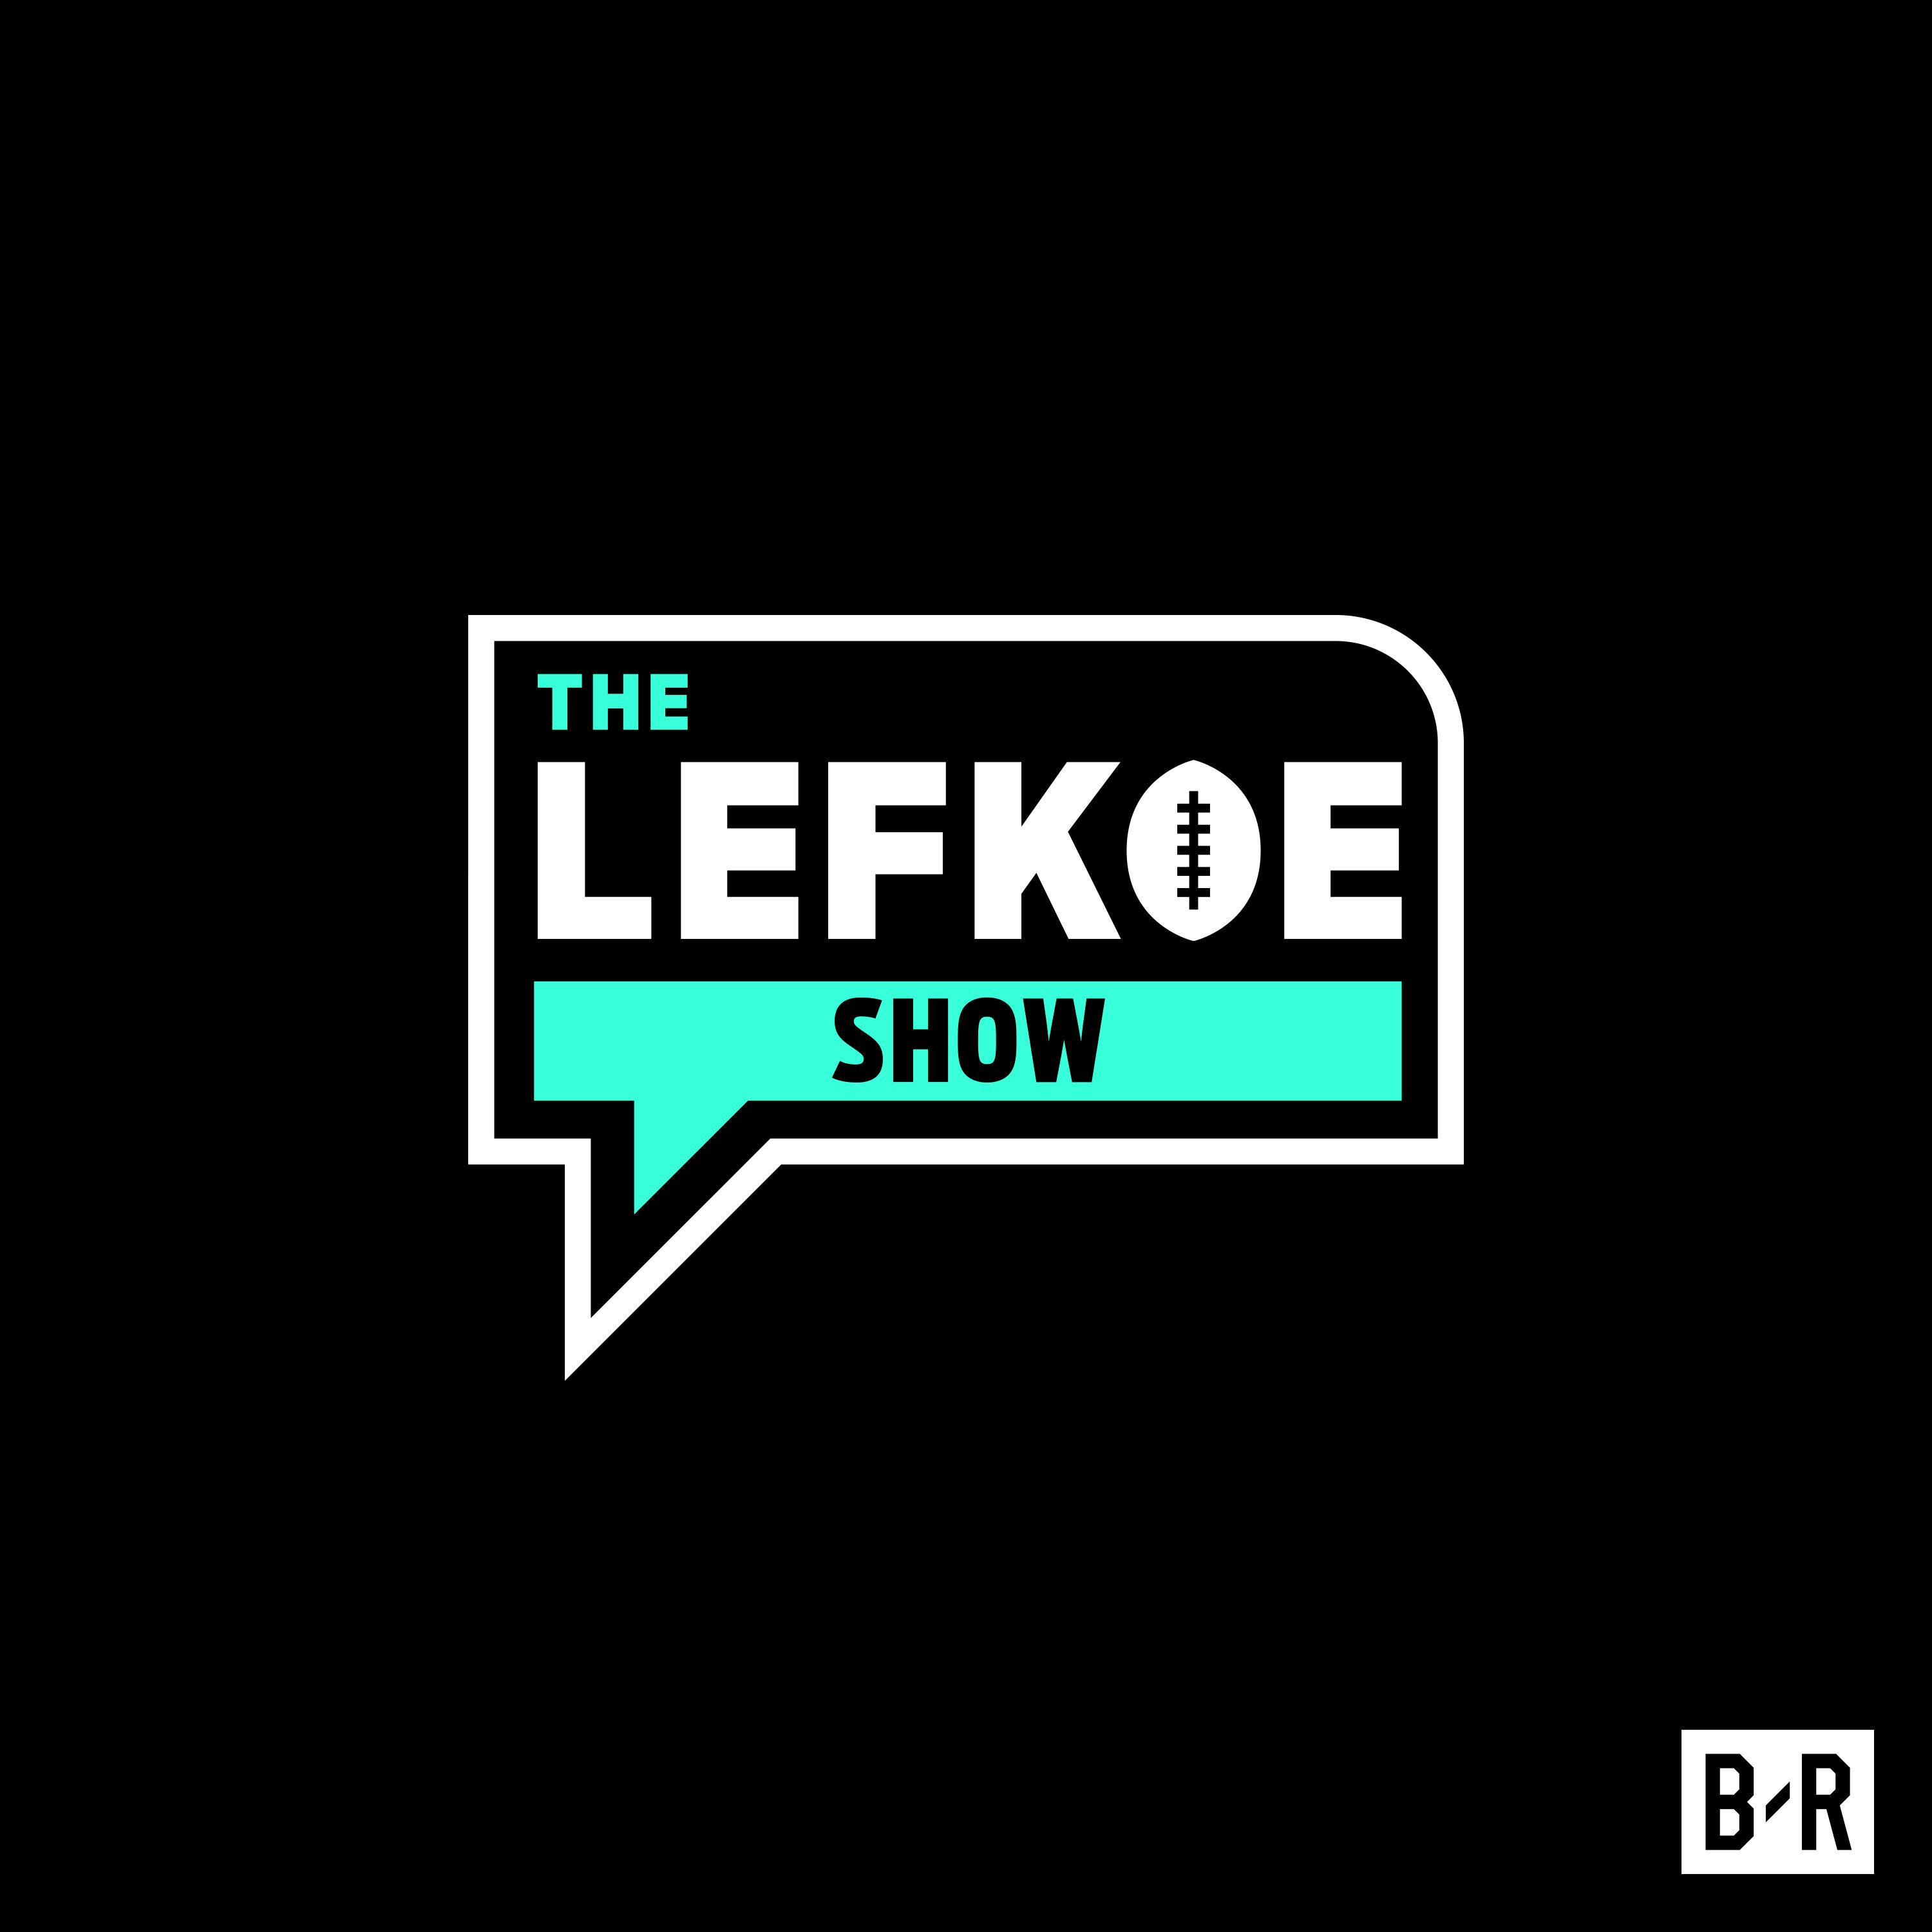 Quavo and Falcons Owner Arthur Blank Join For A Bonus Atlanta Episode! | The Lefkoe Show